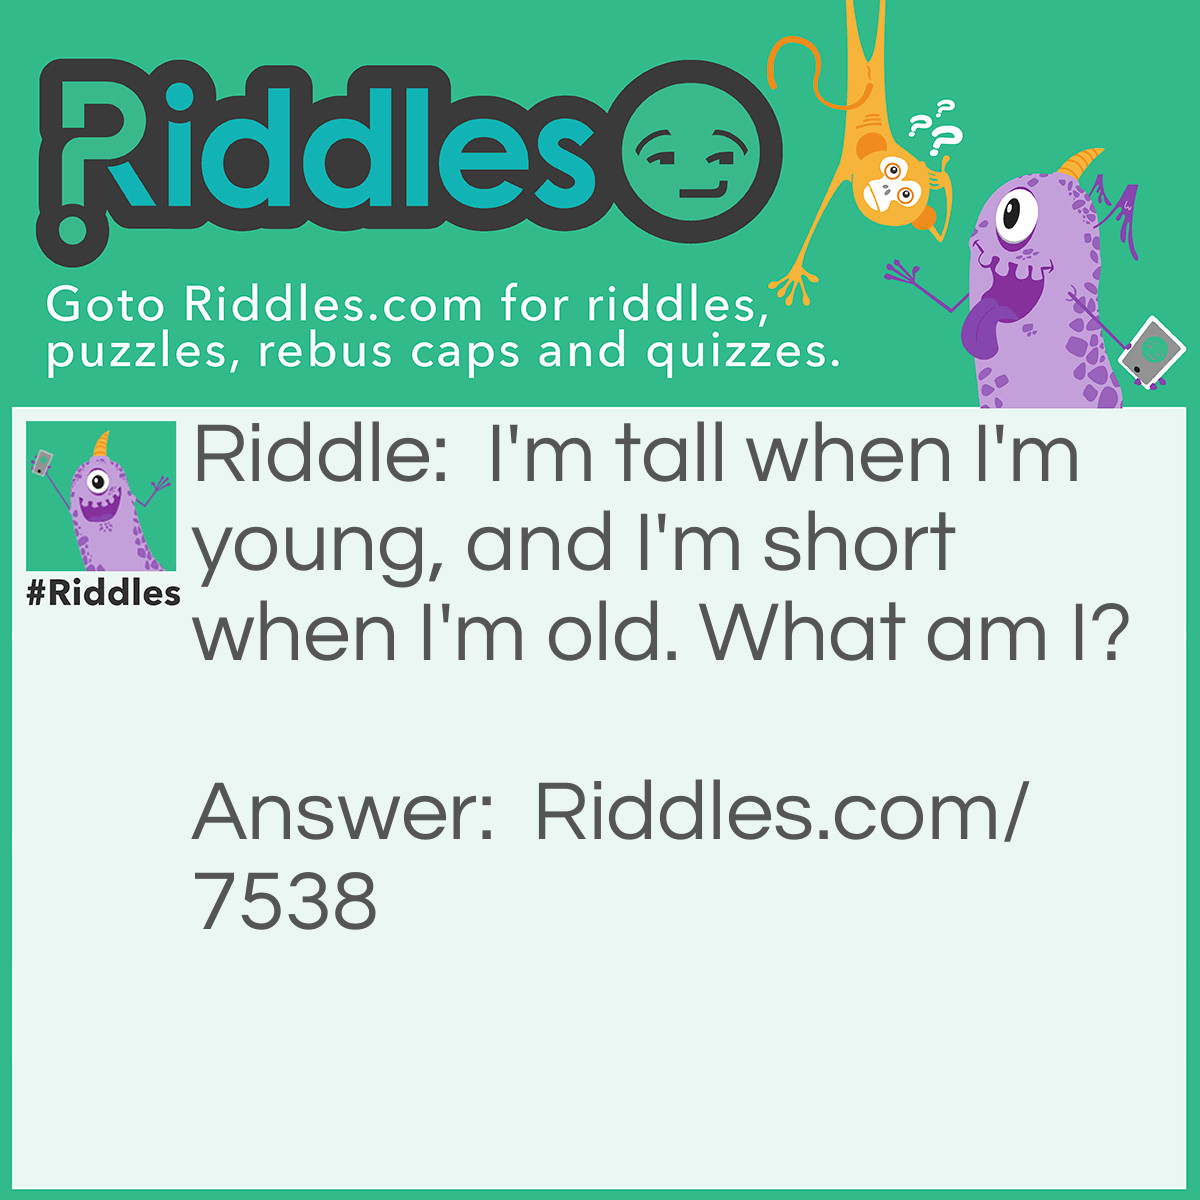 Riddle: I'm tall when I'm young, and I'm short when I'm old. What am I? Answer: A Candle.